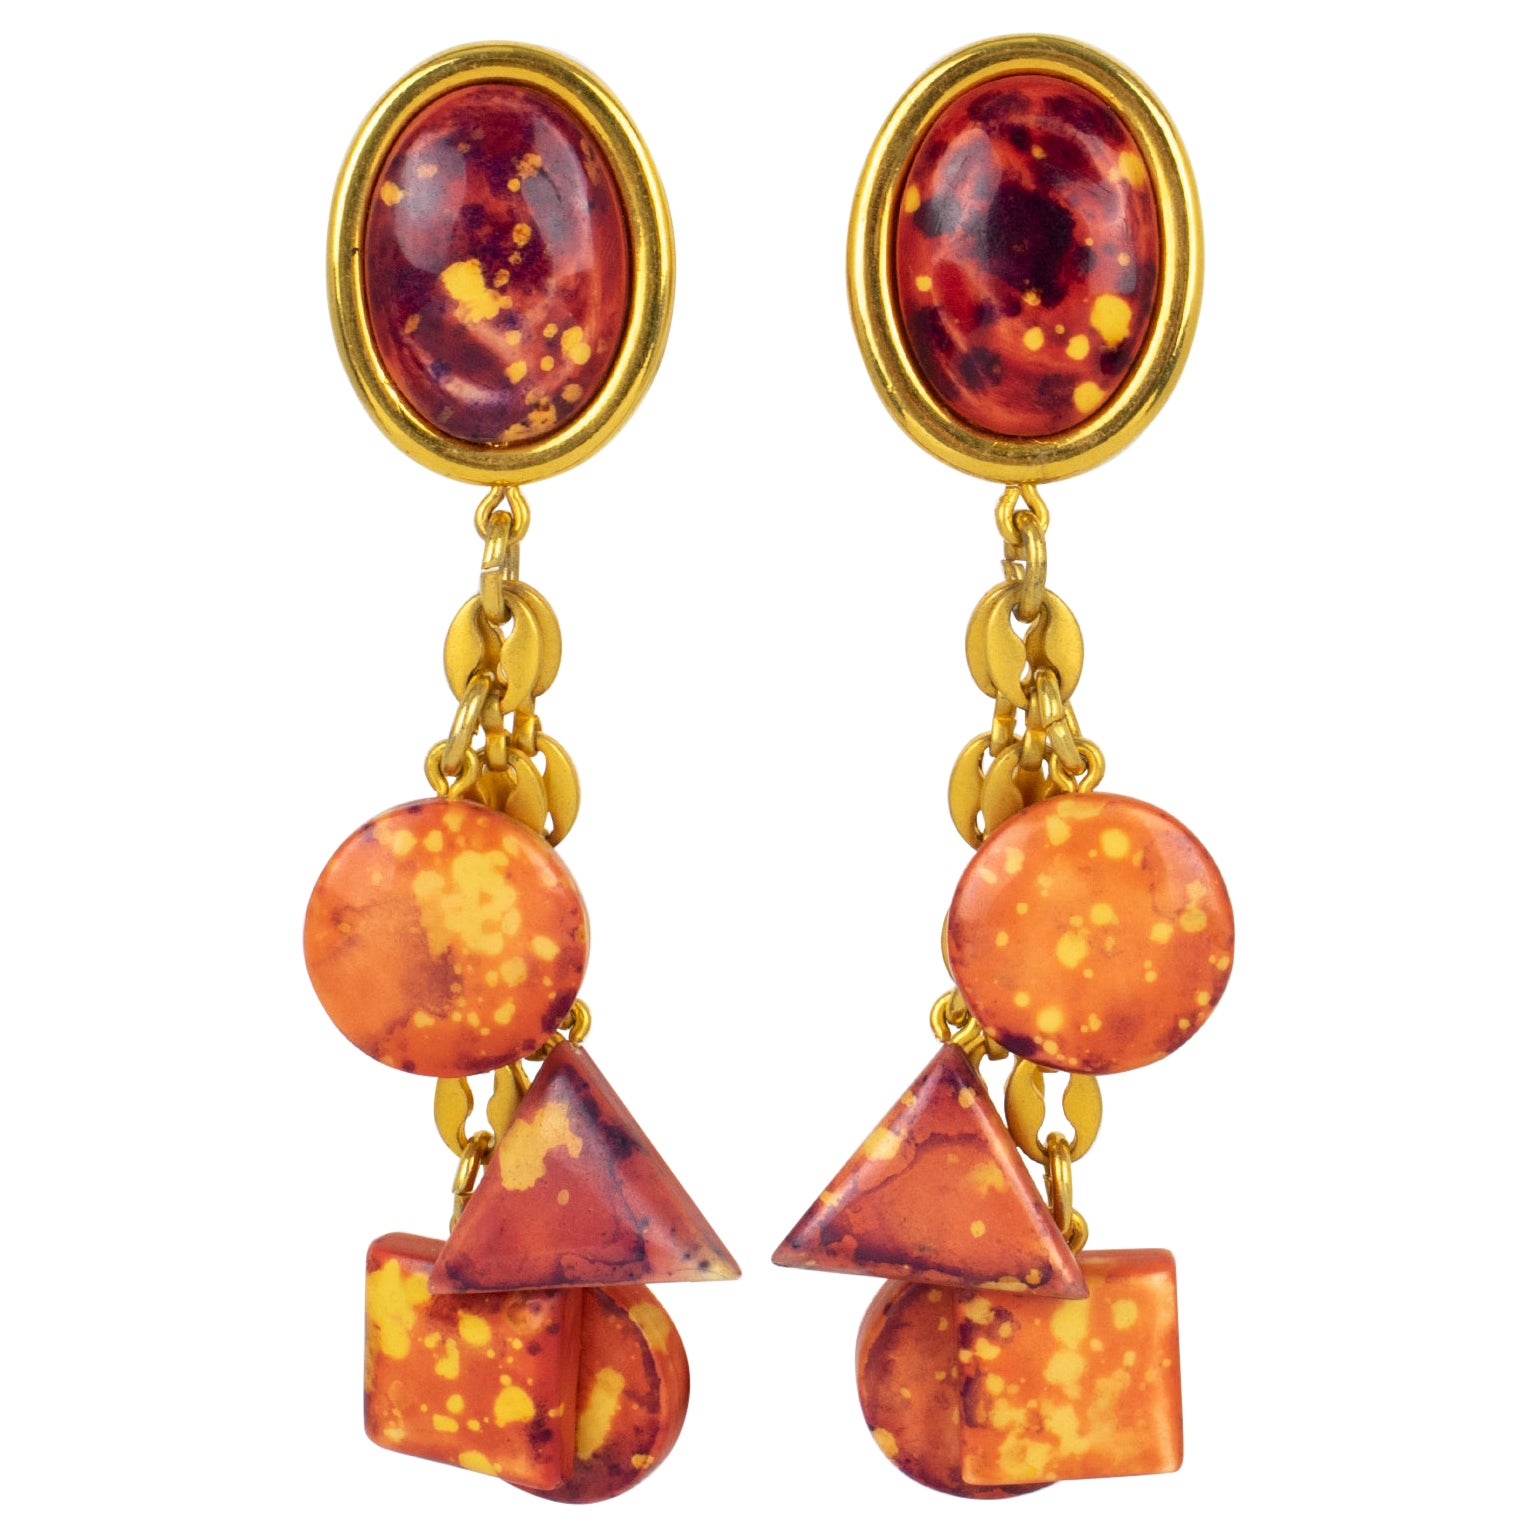 Kenzo Paris Orange and Red Resin Dangle Clip Earrings For Sale